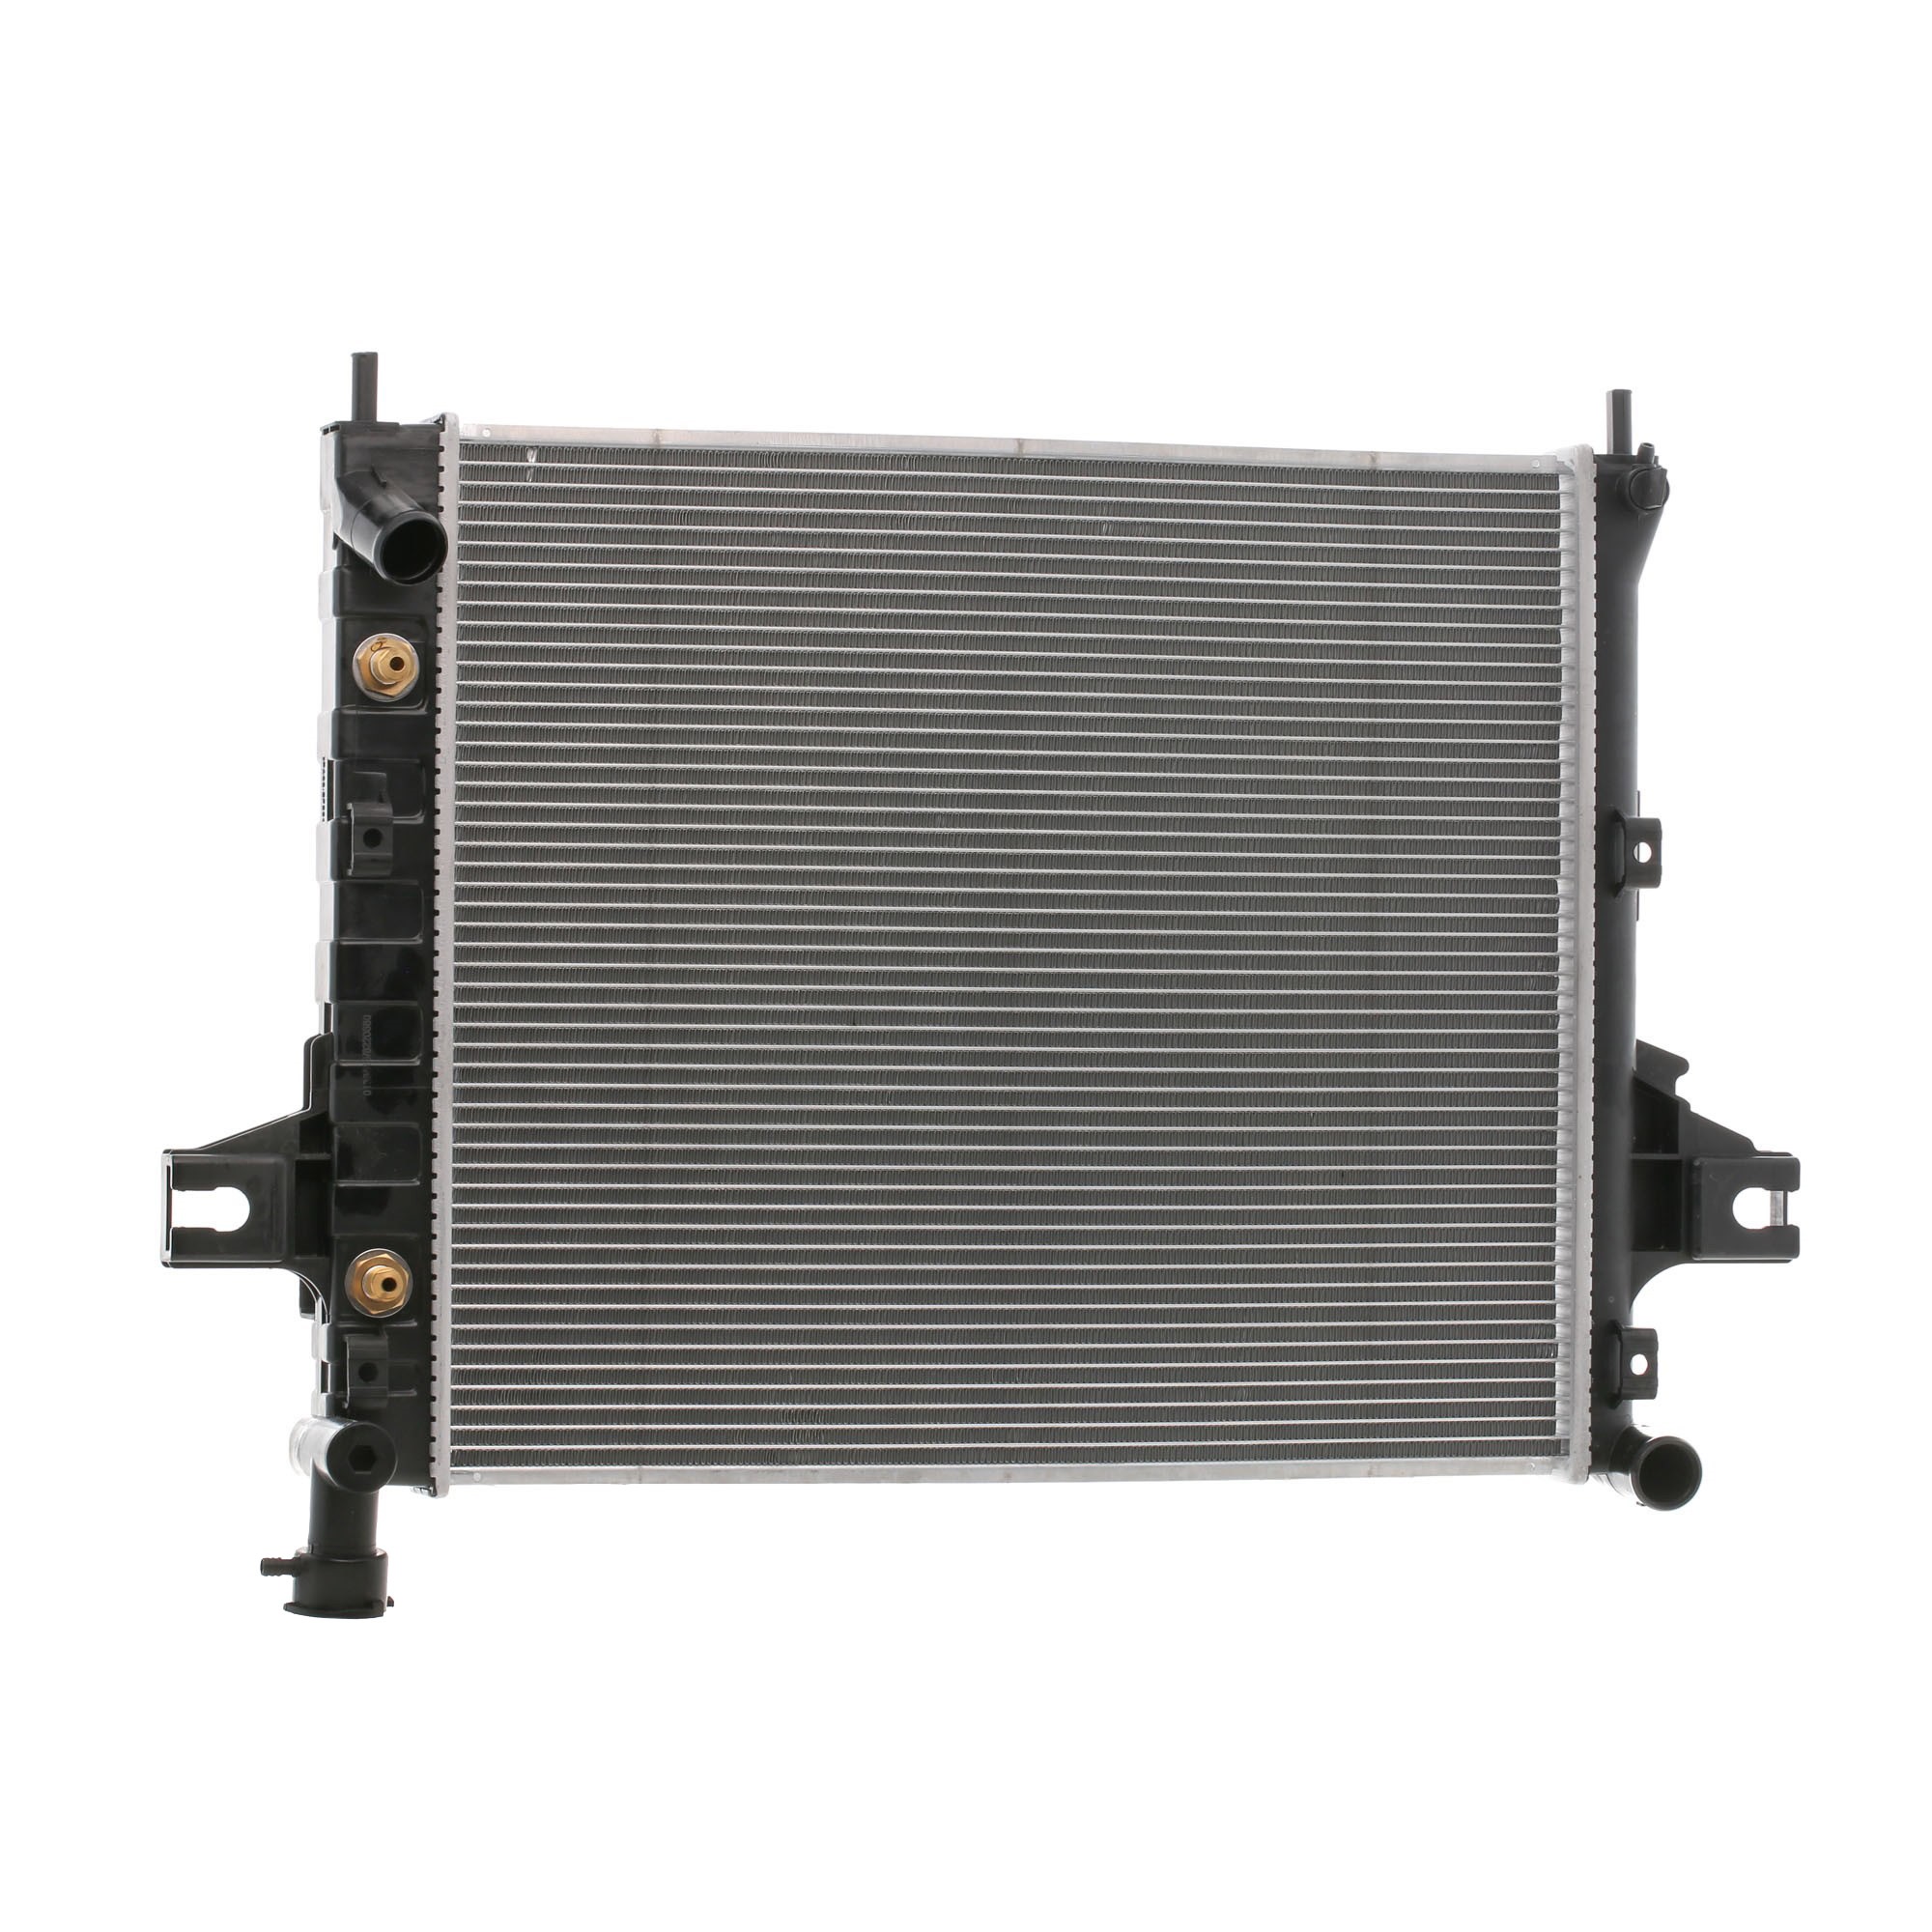 STARK SKRD-0120423 Engine radiator Aluminium, for vehicles with/without air conditioning, Manual-/optional automatic transmission